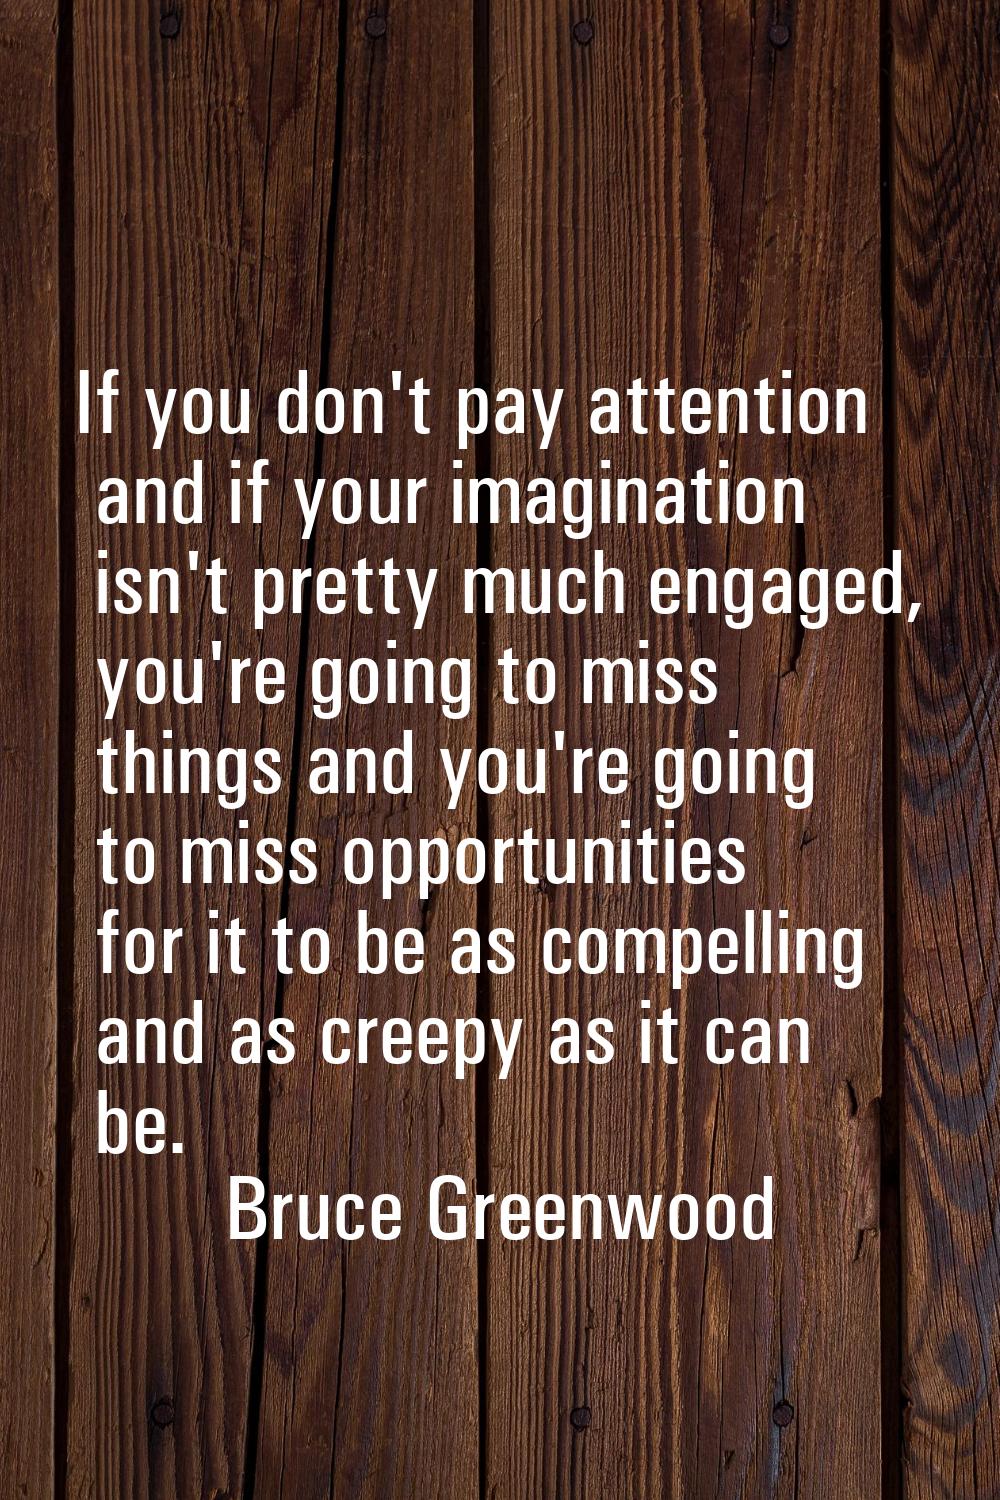 If you don't pay attention and if your imagination isn't pretty much engaged, you're going to miss 